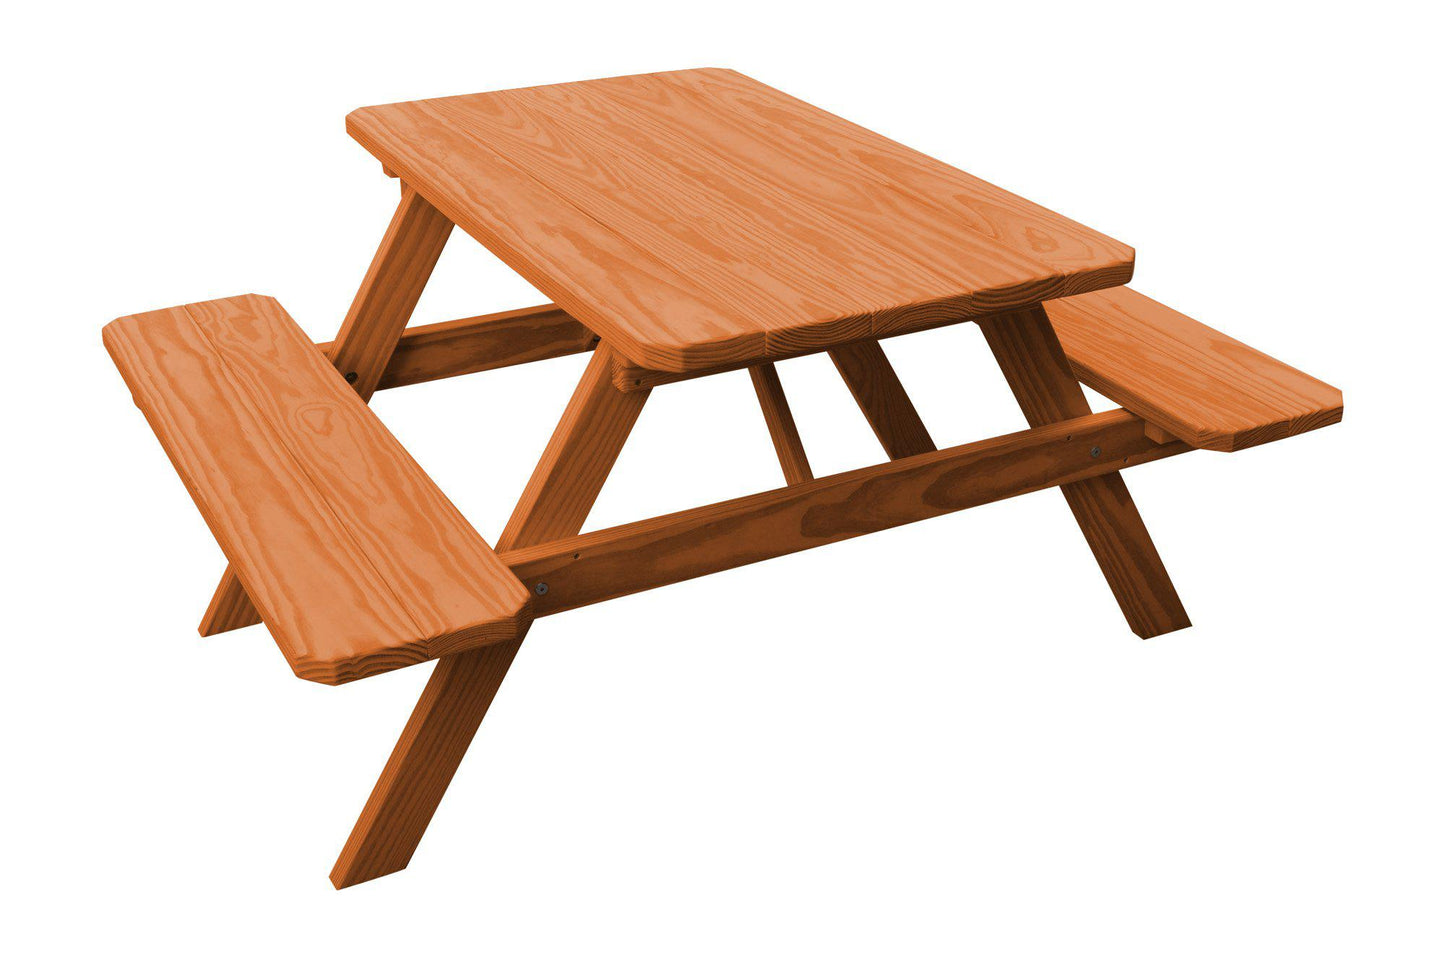 A&L Furniture Co. Yellow Pine 4' Picnic Table with Attached Benches - LEAD TIME TO SHIP 10 BUSINESS DAYS